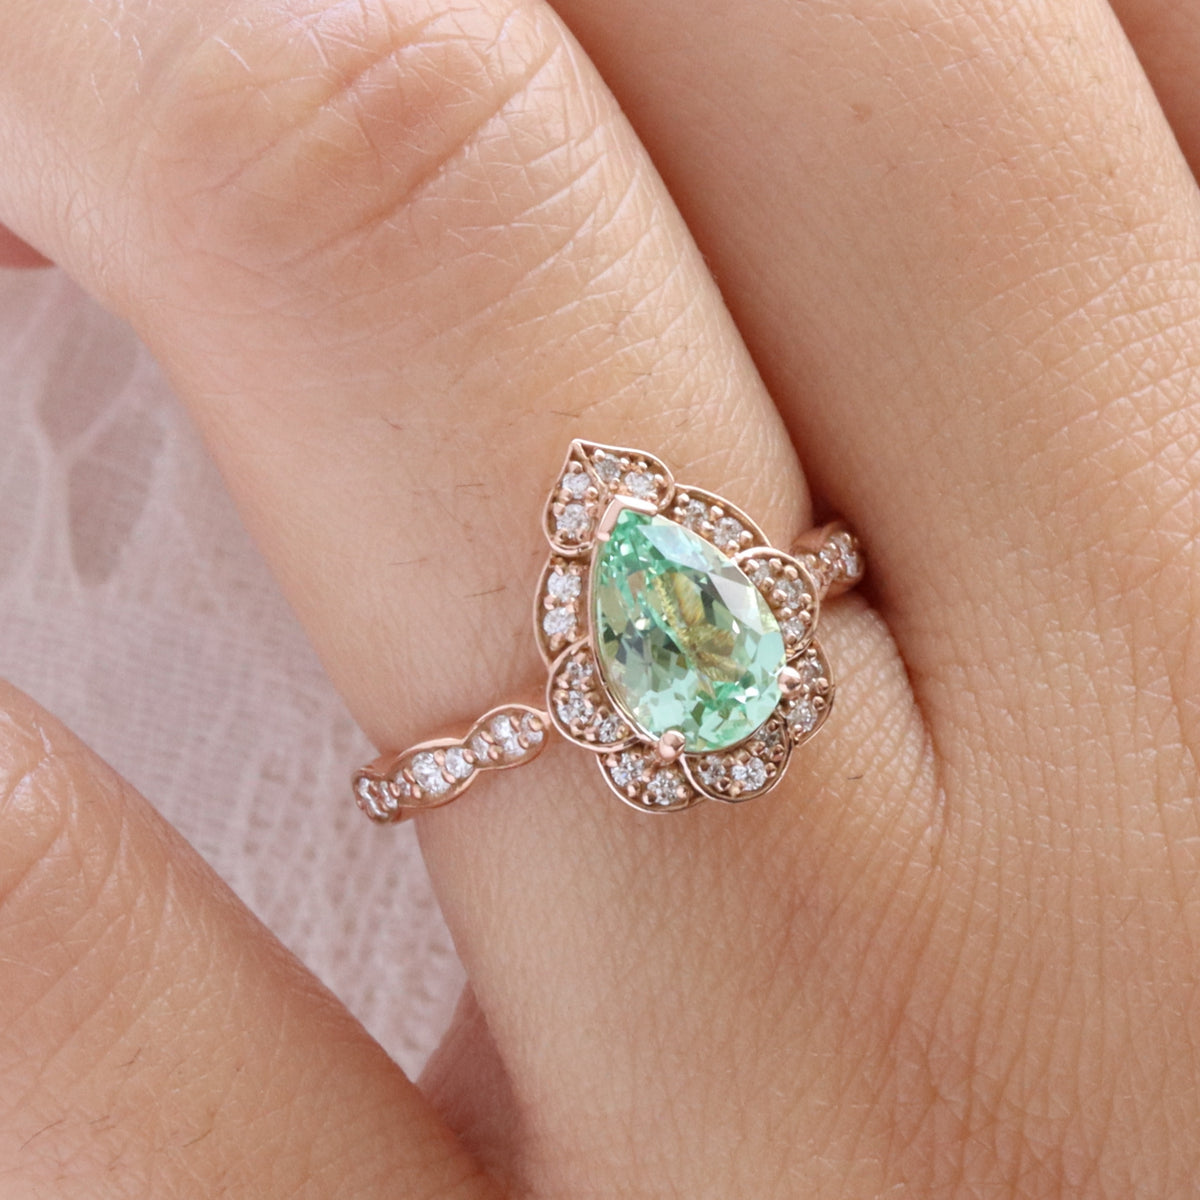 Large pear green sapphire engagement ring rose gold vintage halo diamond sapphire ring la more design jewelry